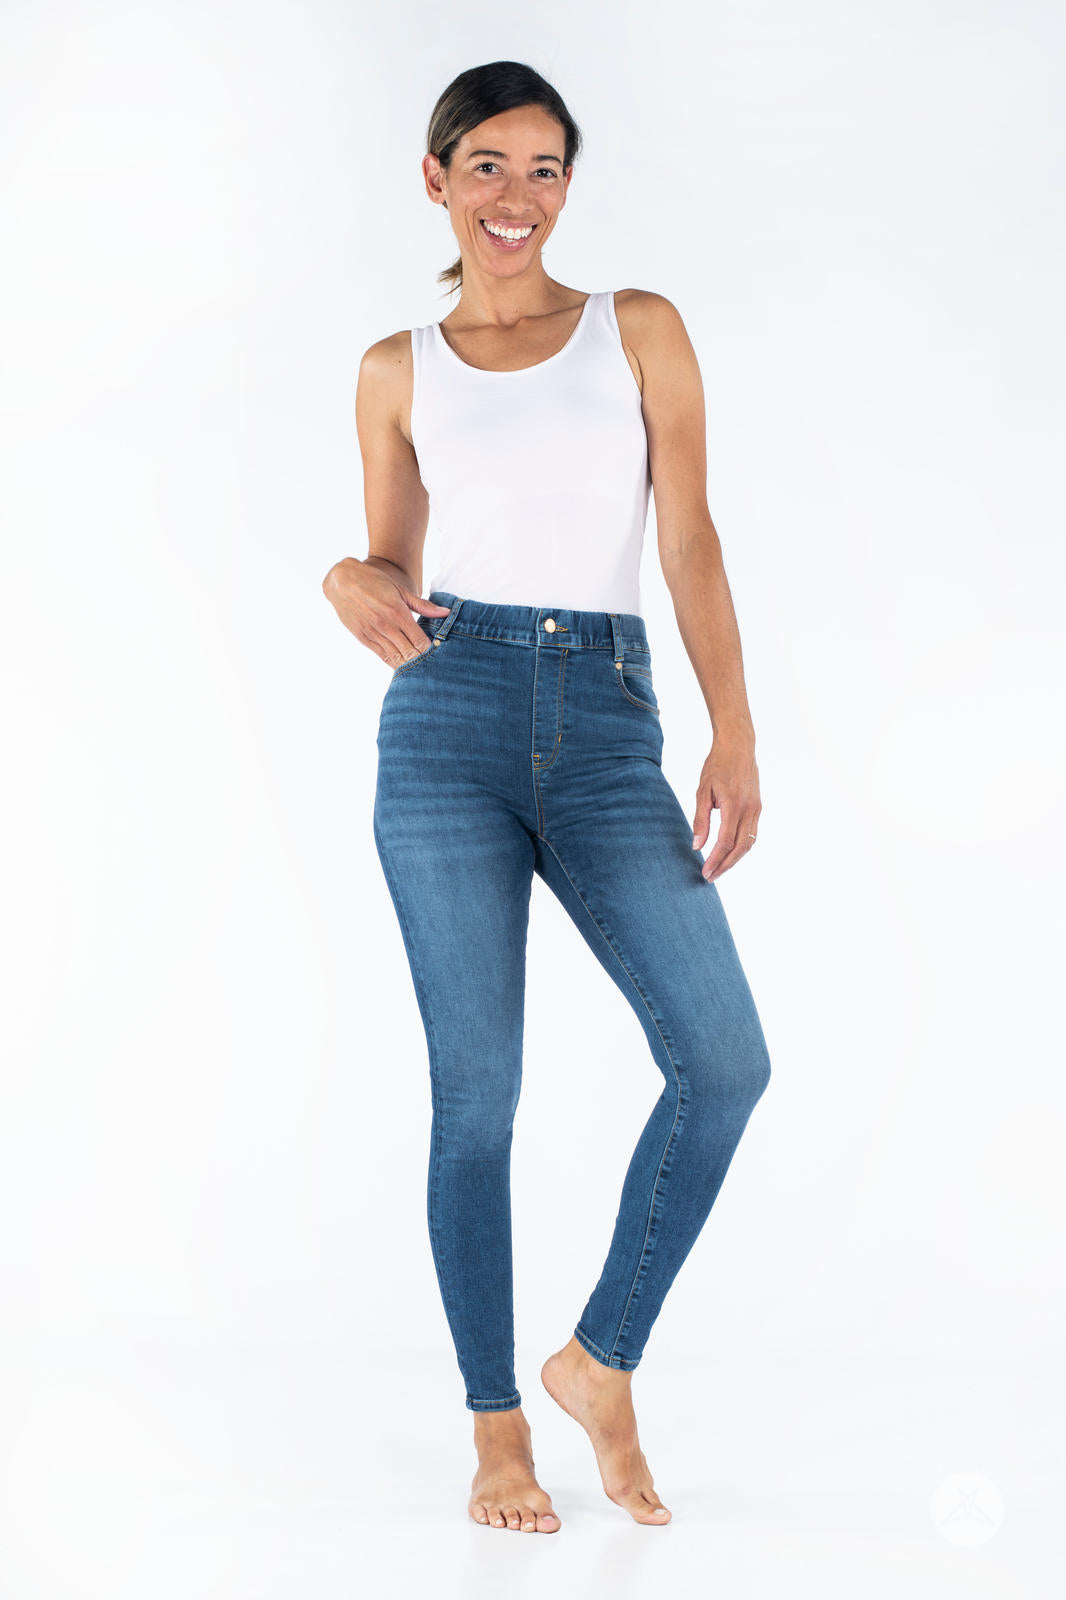 Women's Classic Distressed Skinny Jeggings. These jeggings are